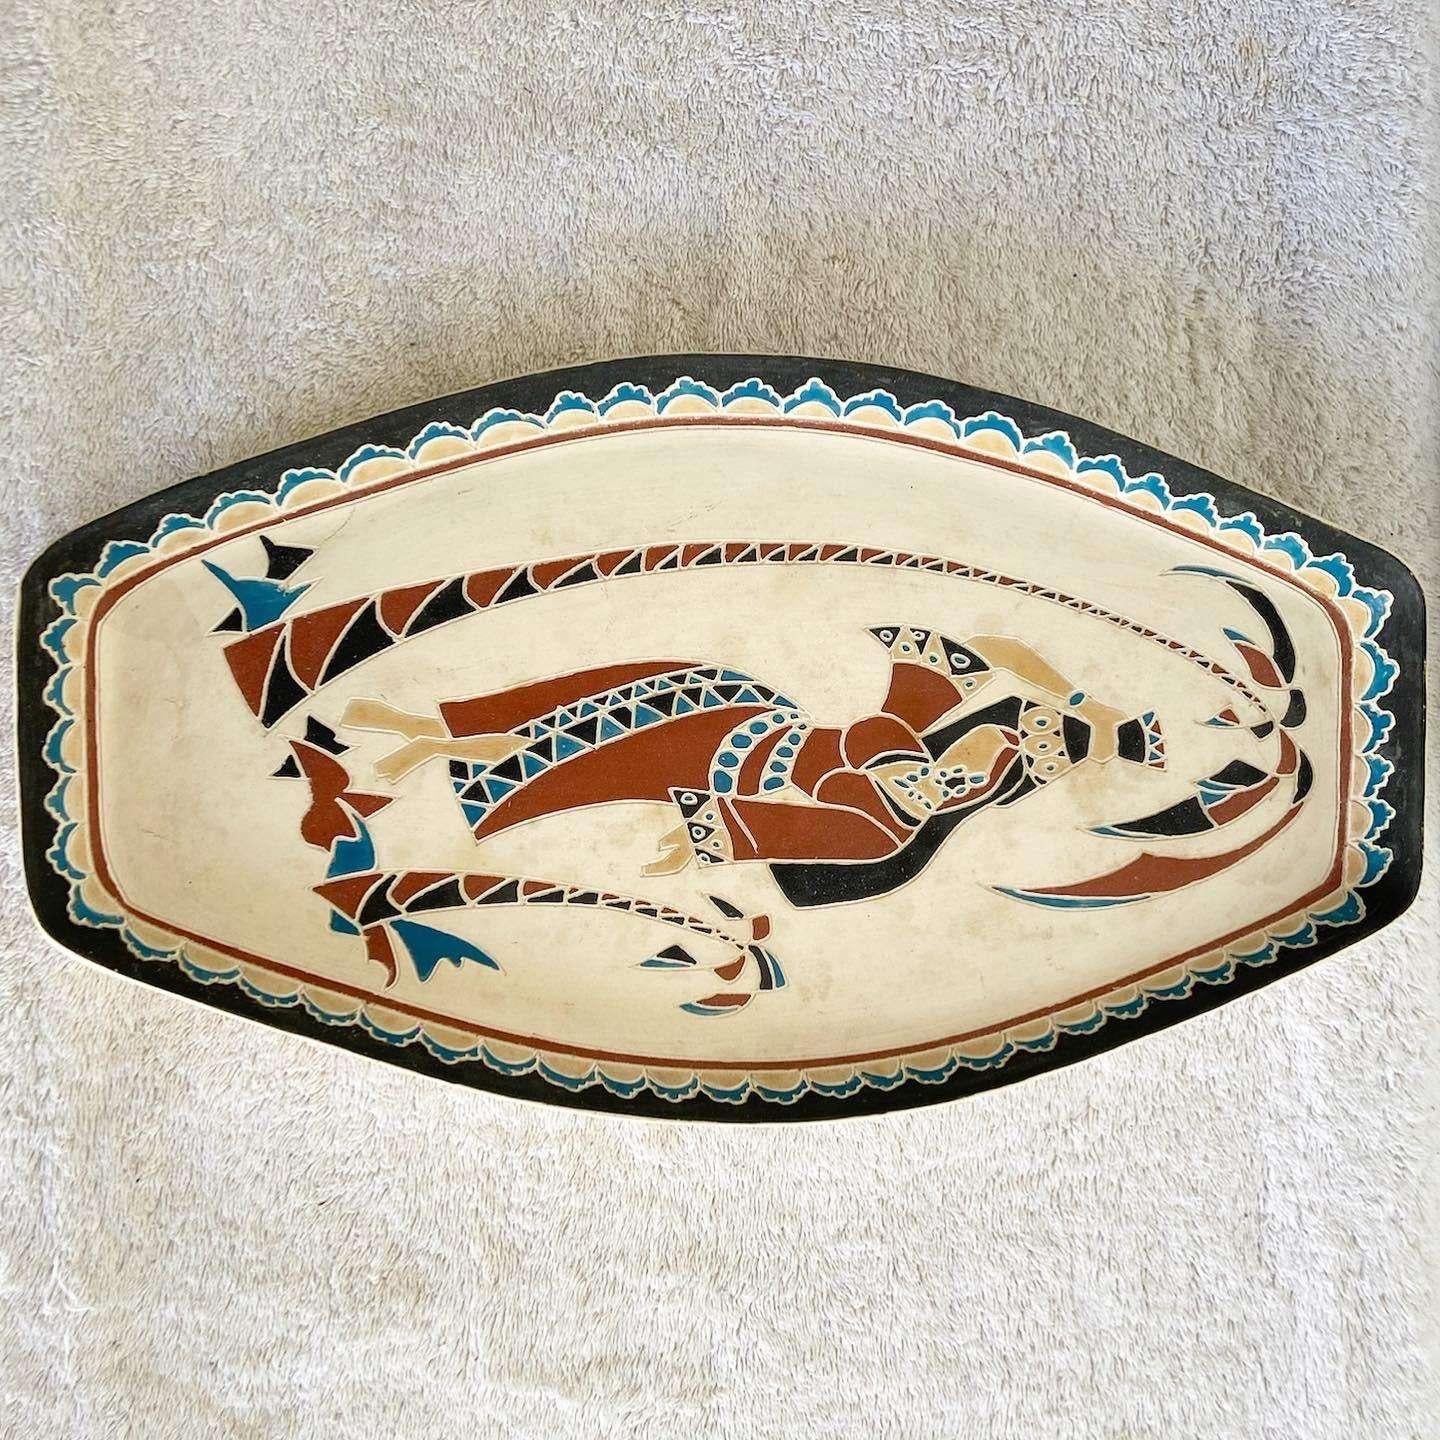 Amazing vintage middle eastern hand painted platter, made Is Israel. Features a lady carrying a jug on her head beneath a tree.
